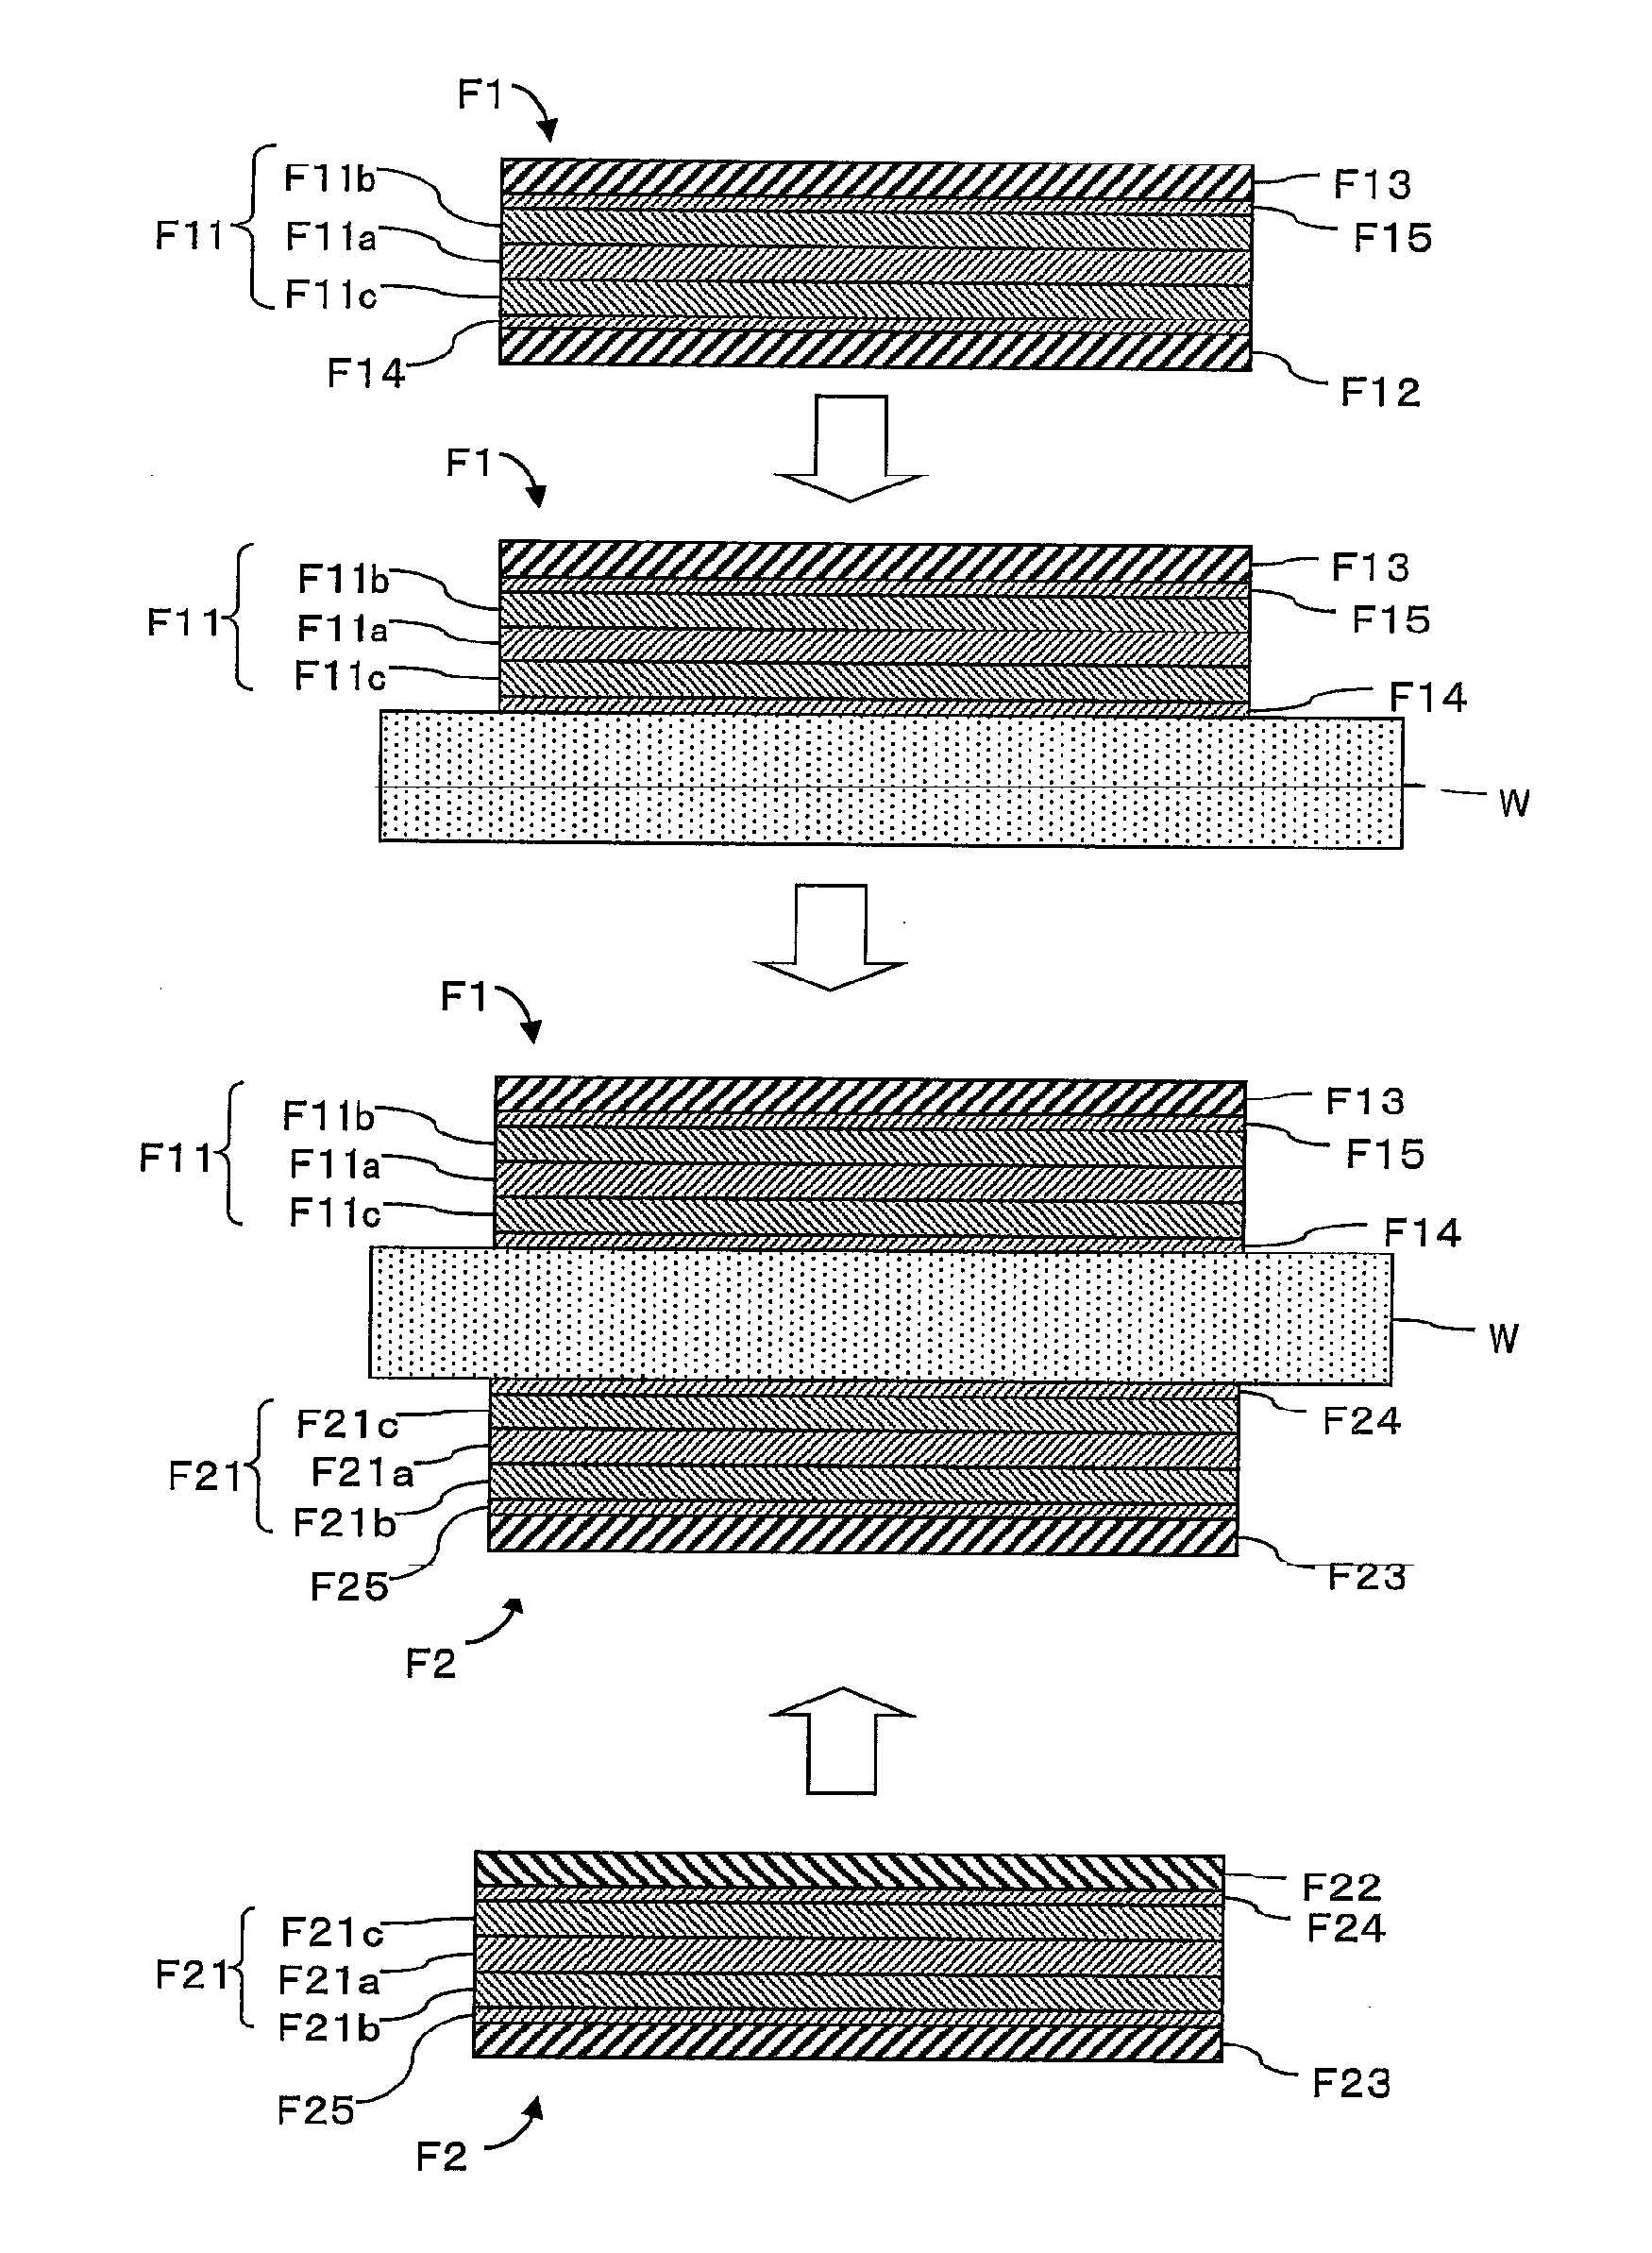 Optical display device manufacturing system and optical display device manufacturing method